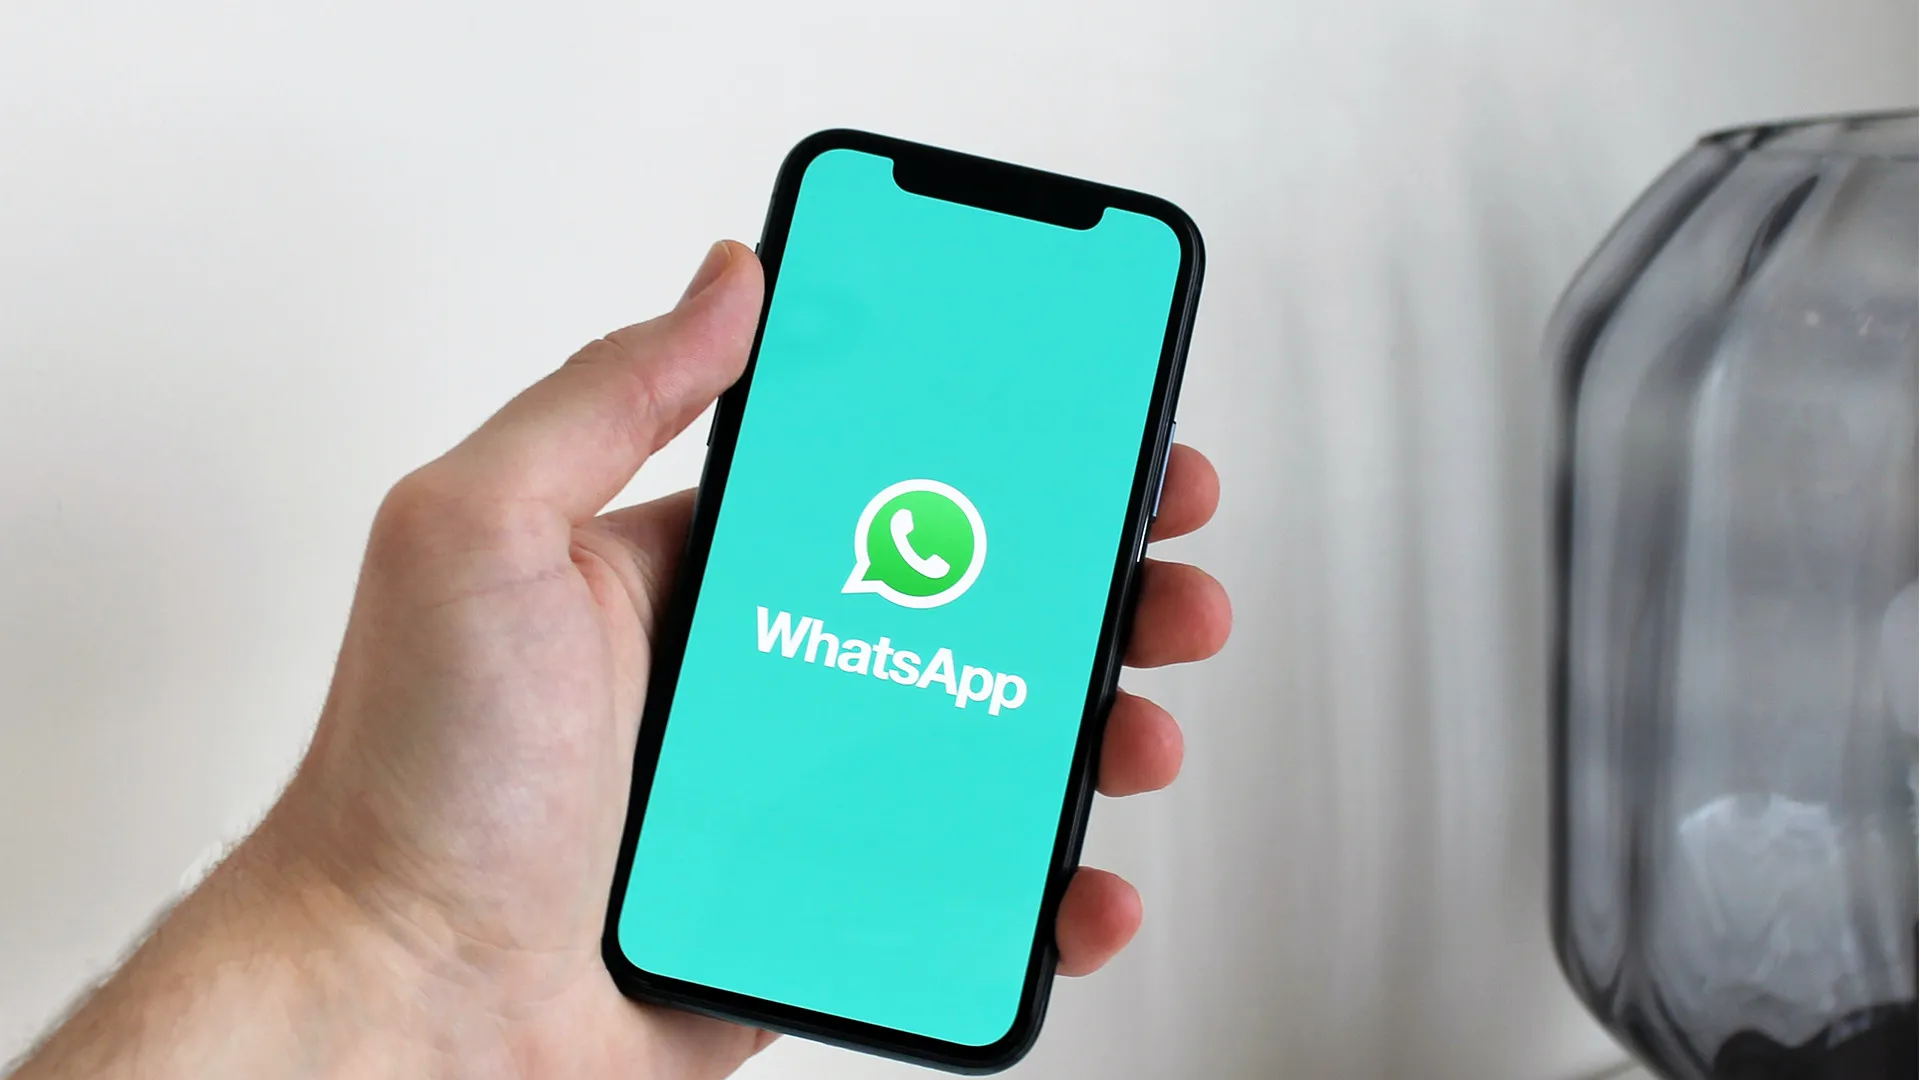 Like Snapchat, WhatsApp is Introducing View-Once Messages